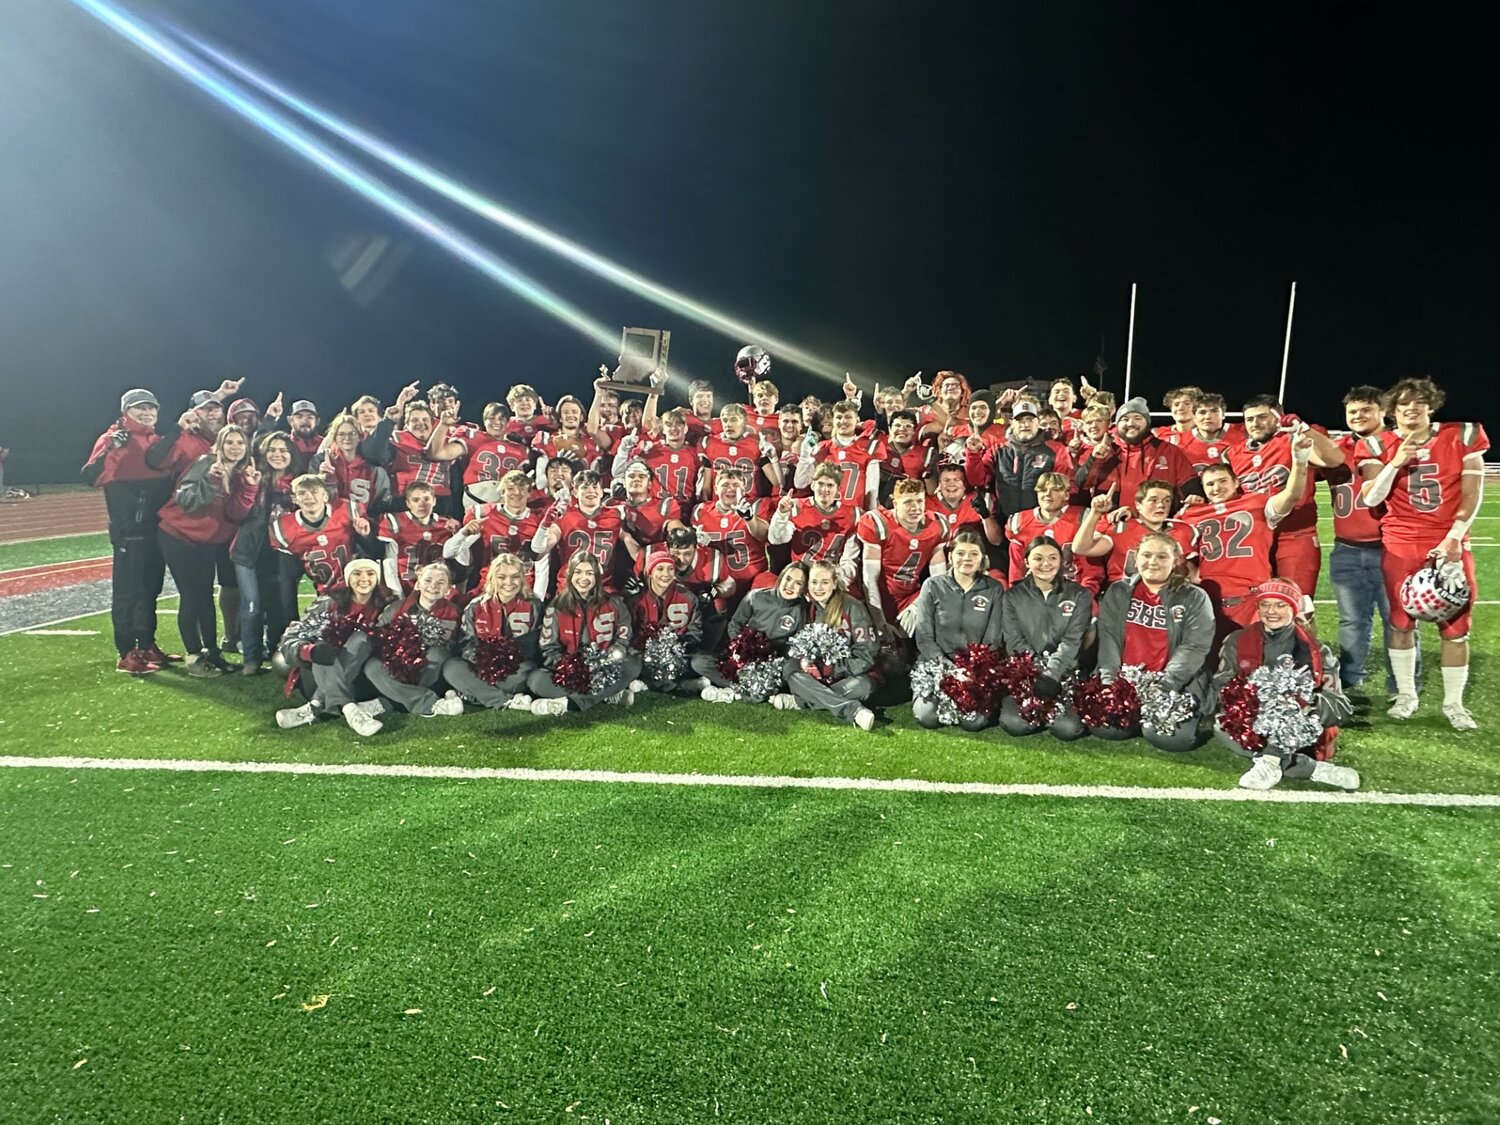 Southmont football accomplished history this past fall. The Mounties made it all the way to the semi-state after winning their first sectional and regional titles in school history.